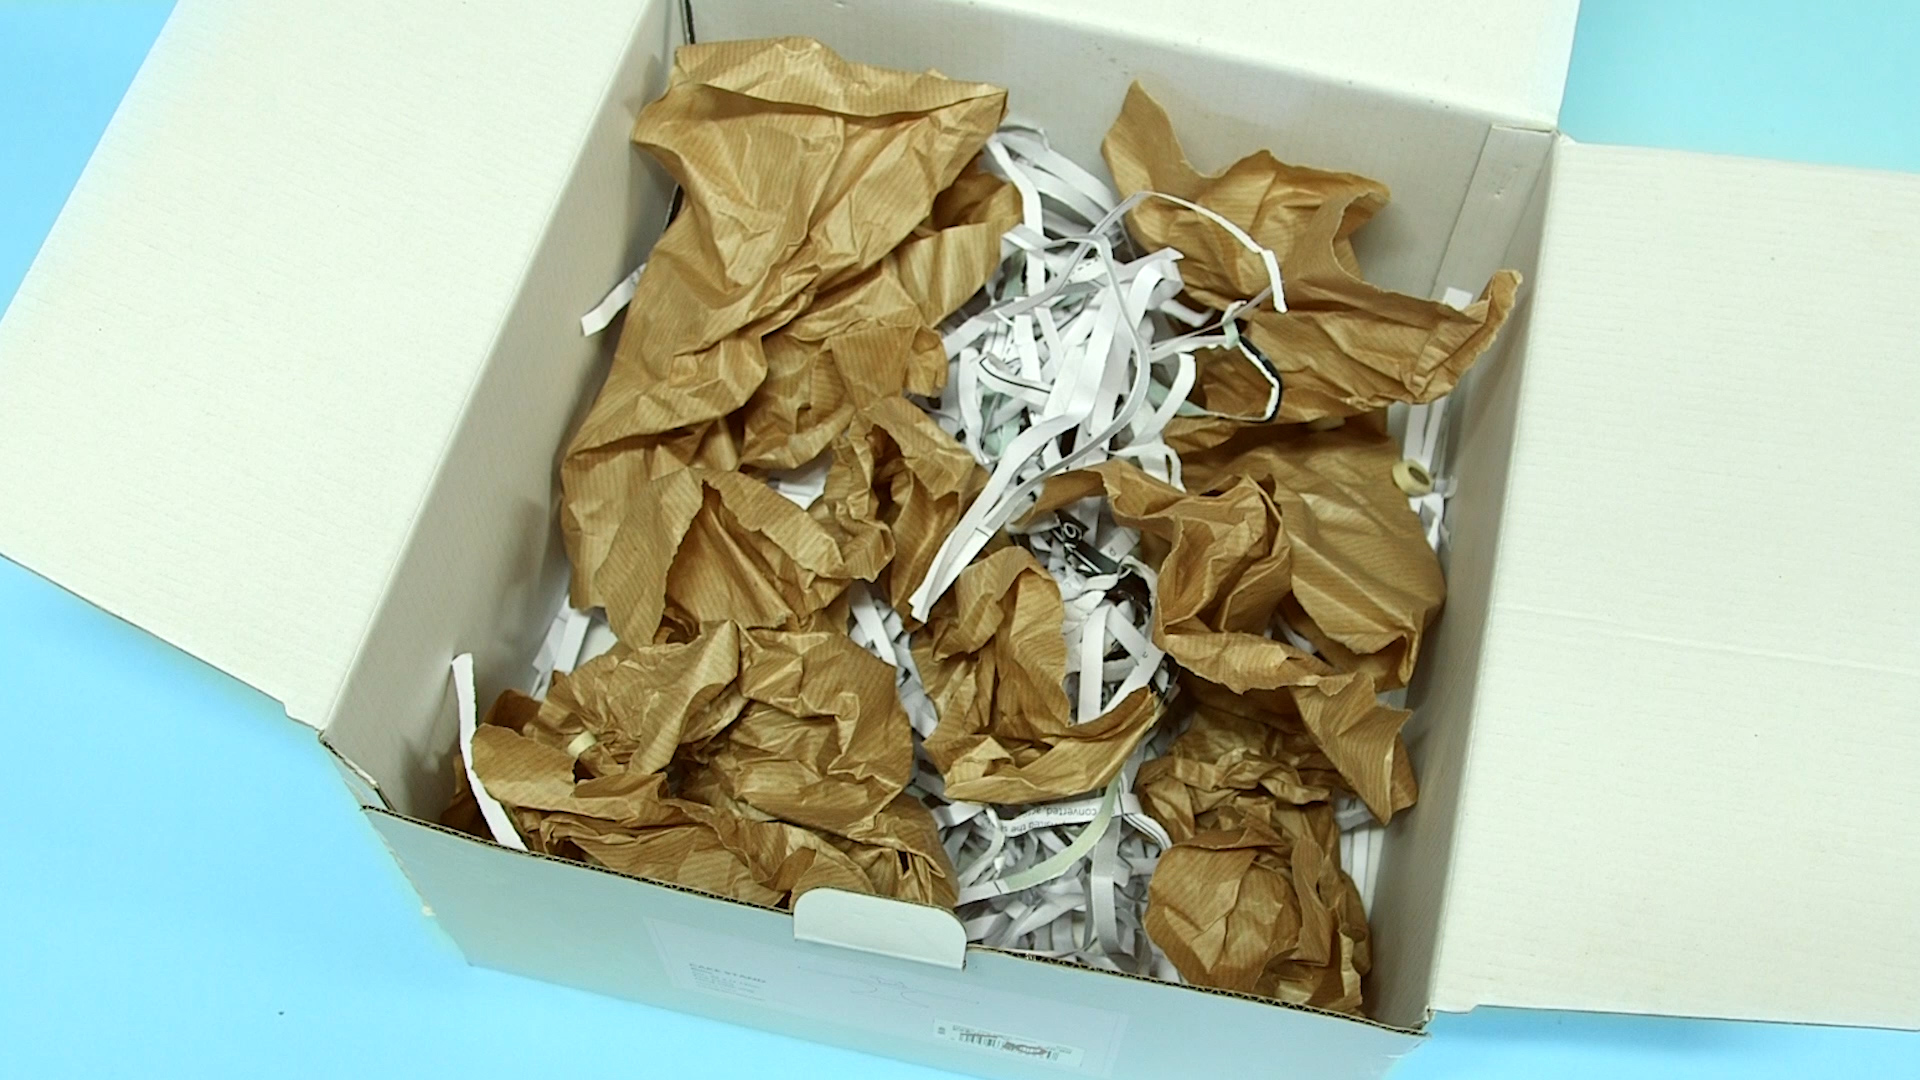 Box with rolled up and shredded paper to demonstrate destruction box